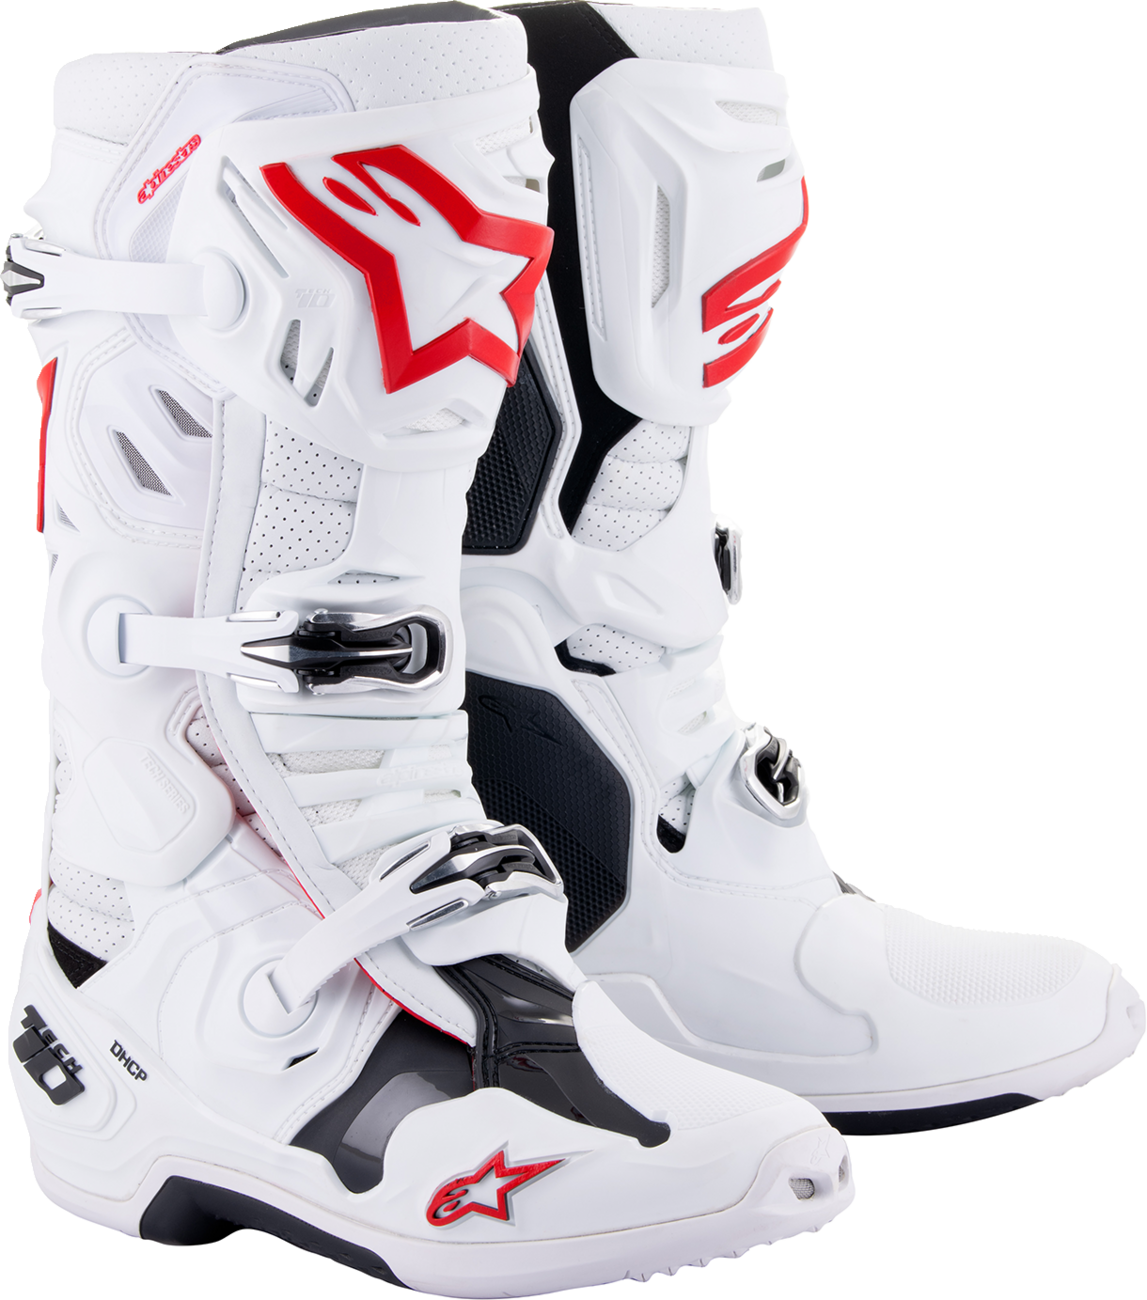 ALPINESTARS Tech 10 Supervented Boots - White/Red - US 13 2010520-2230-13